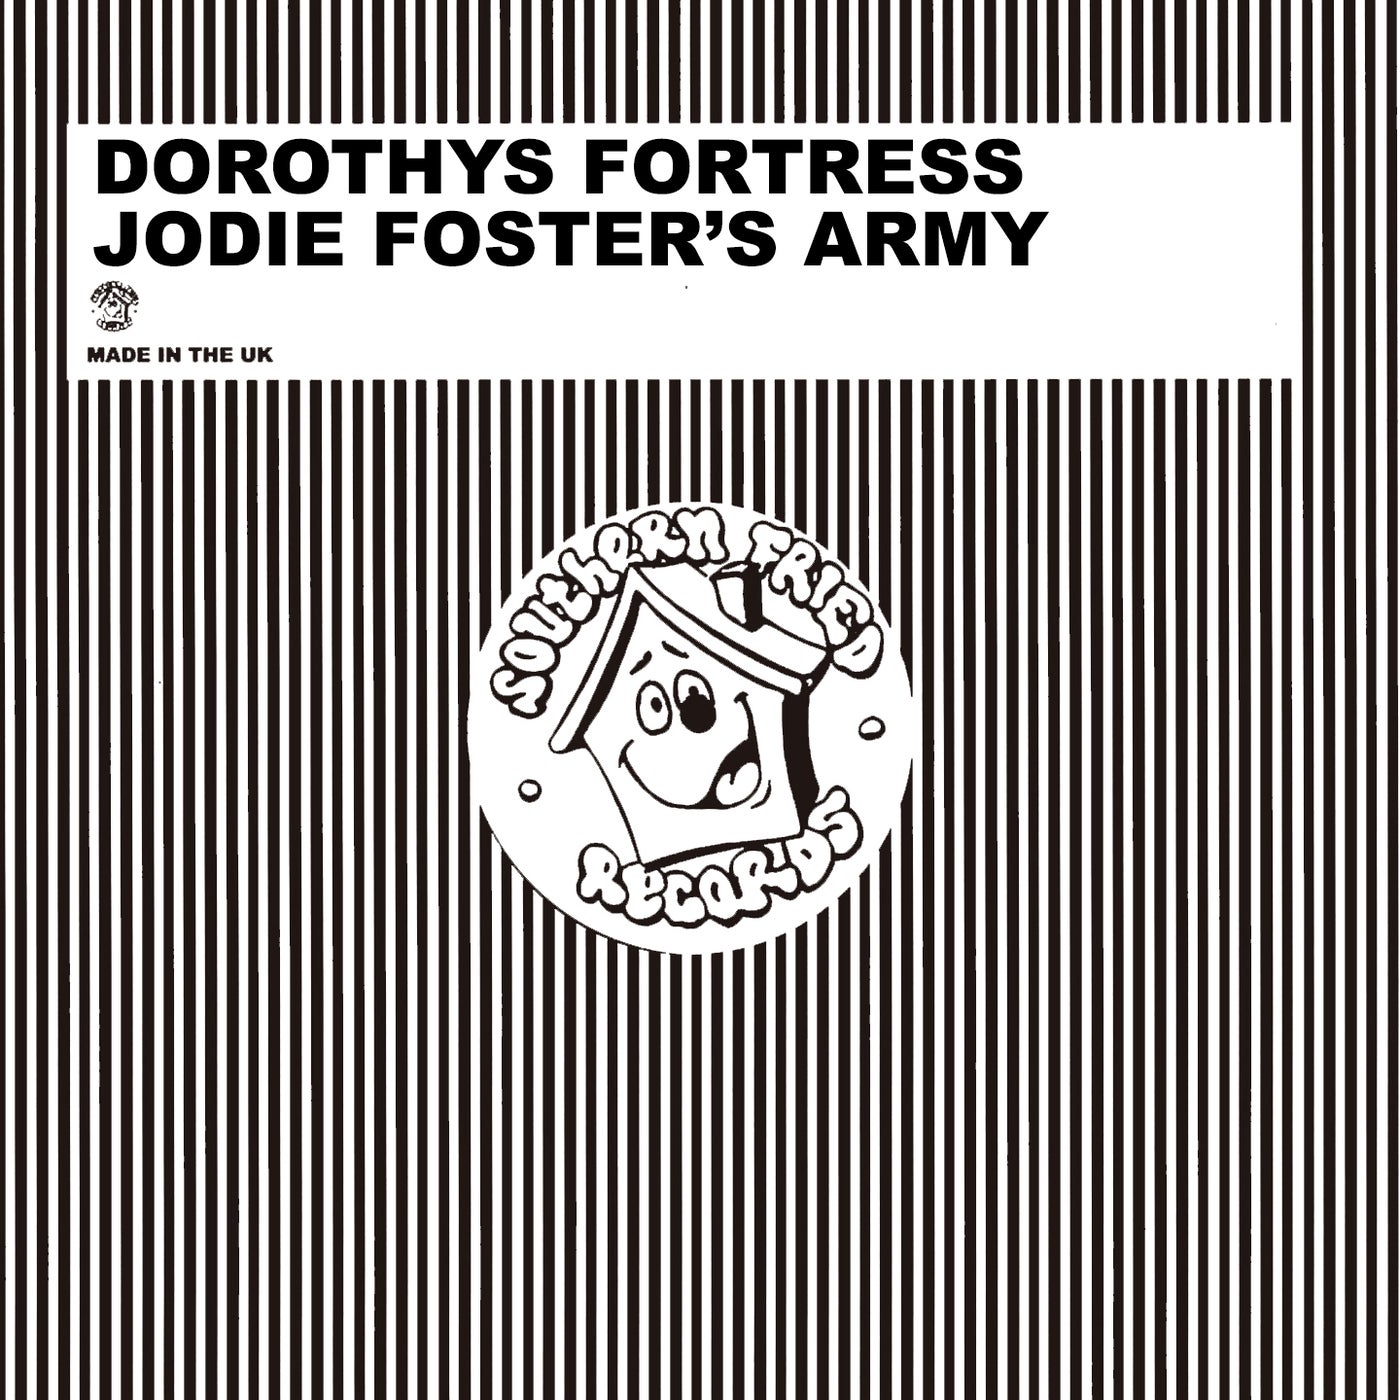 Jodie Foster's Army